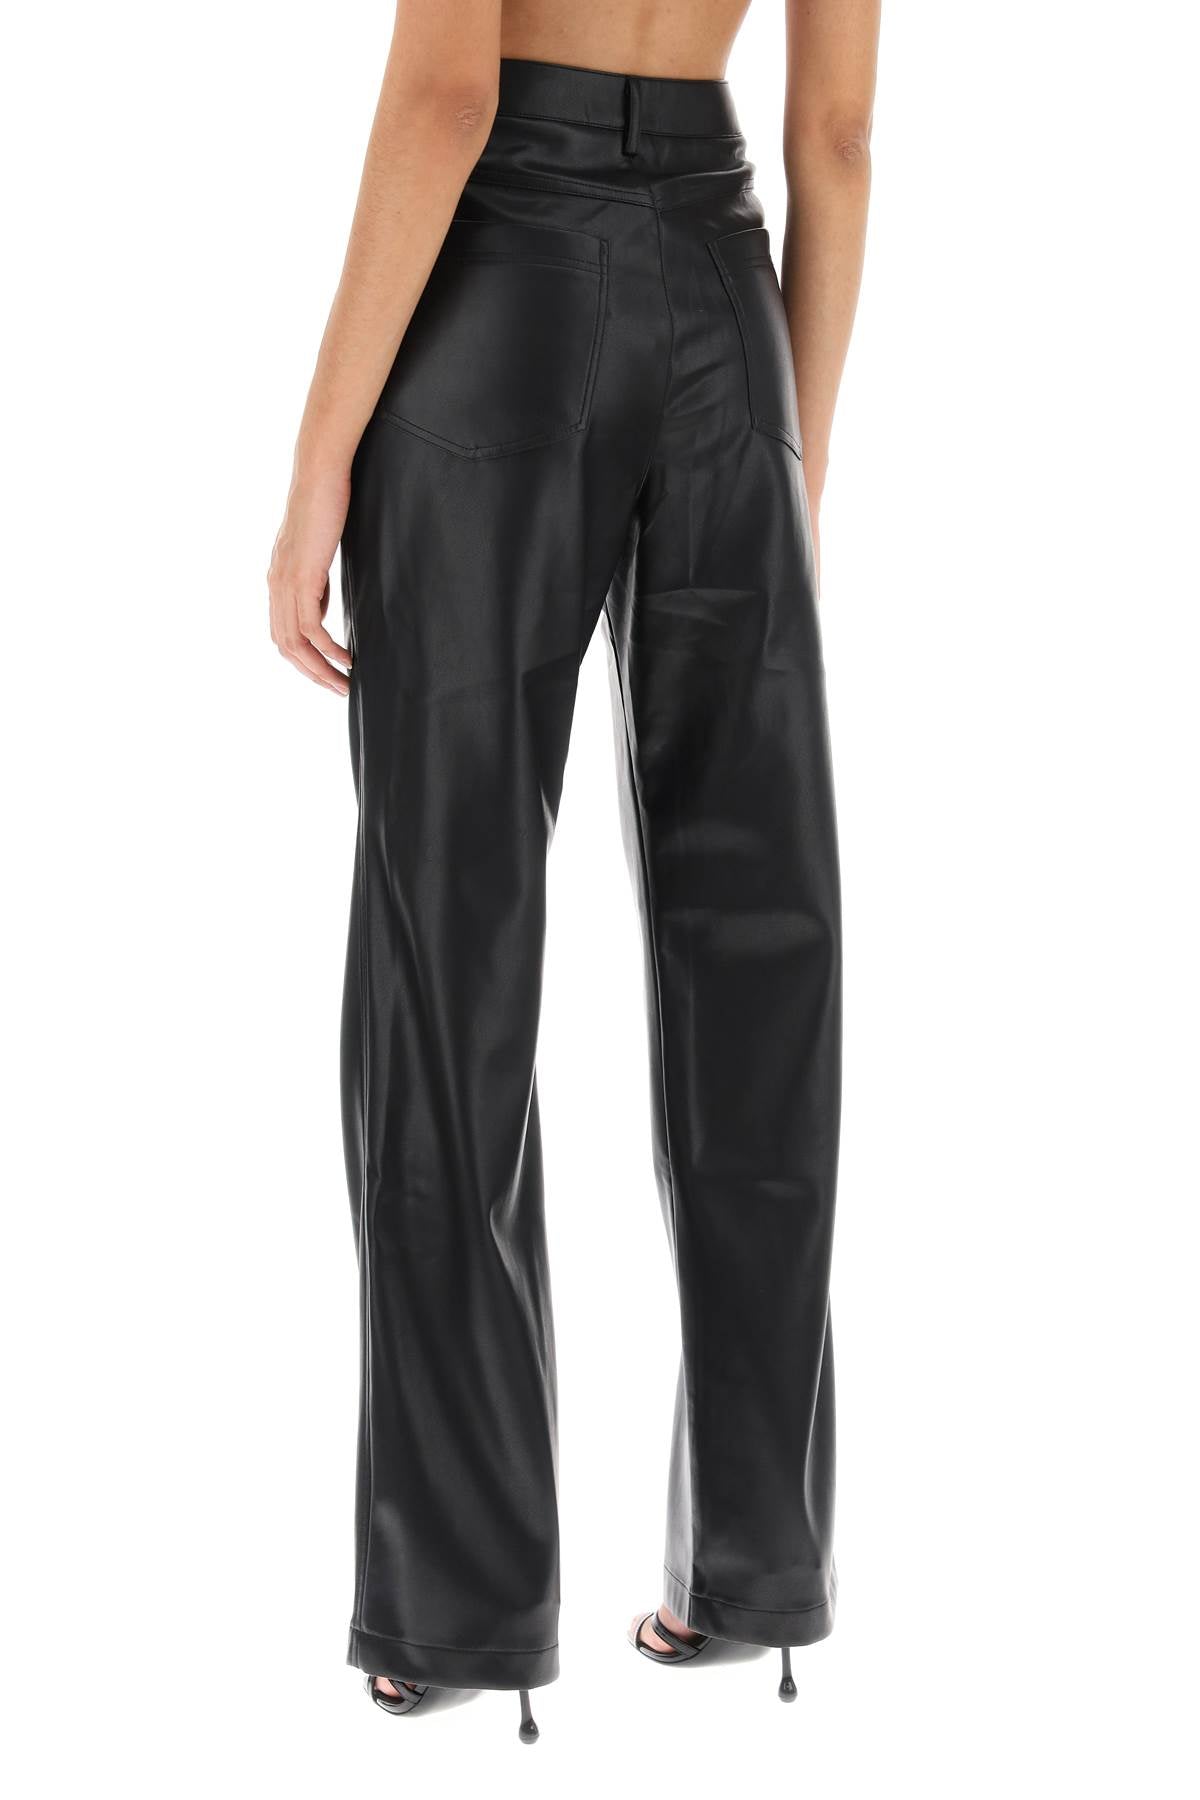 Rotate embellished button faux leather pants-women > clothing > trousers-Rotate-38-Black-Urbanheer